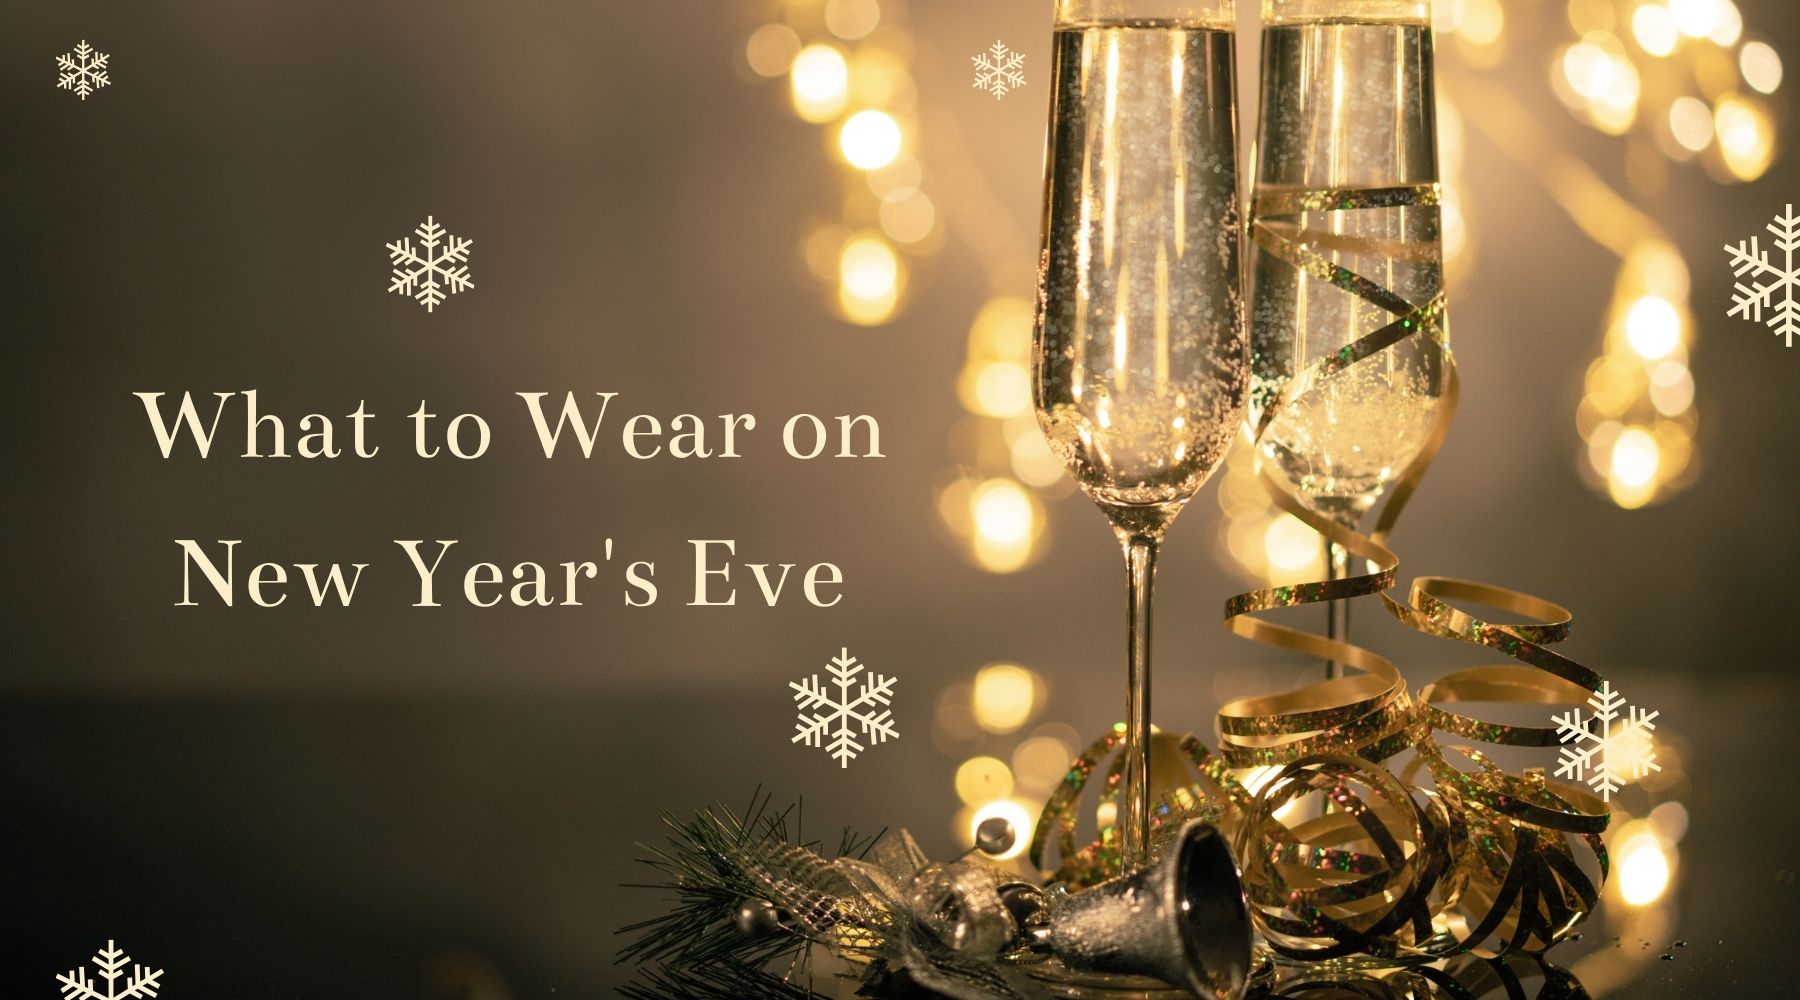 What to Wear on New Year's Eve